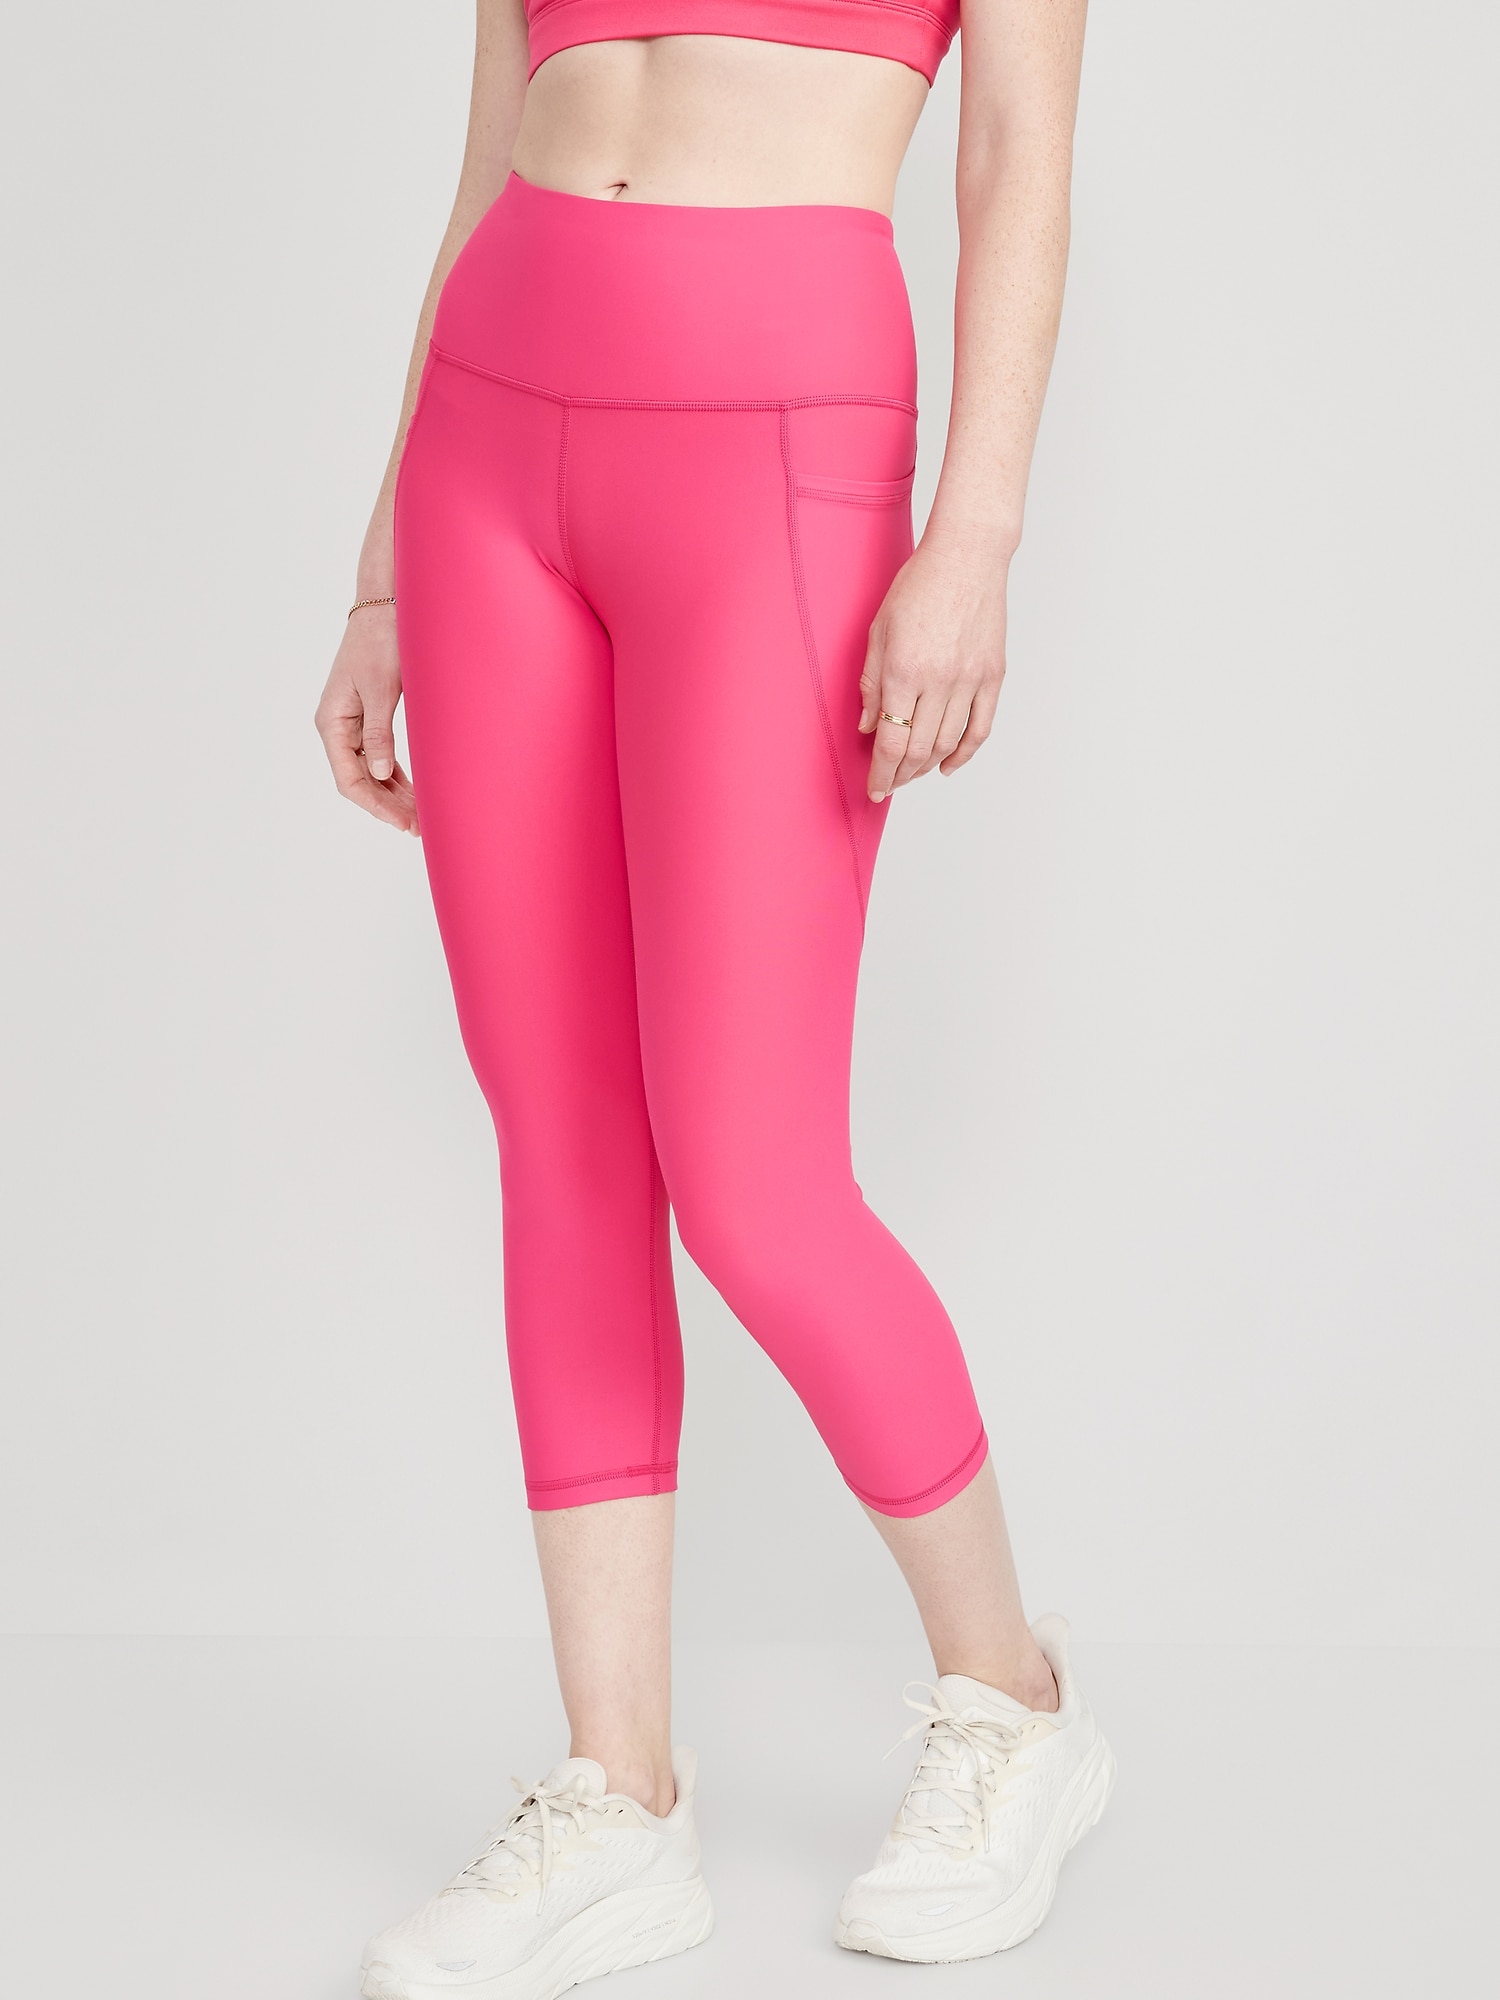 Old Navy - High-Waisted PowerSoft Side-Pocket Crop Leggings for Women pink